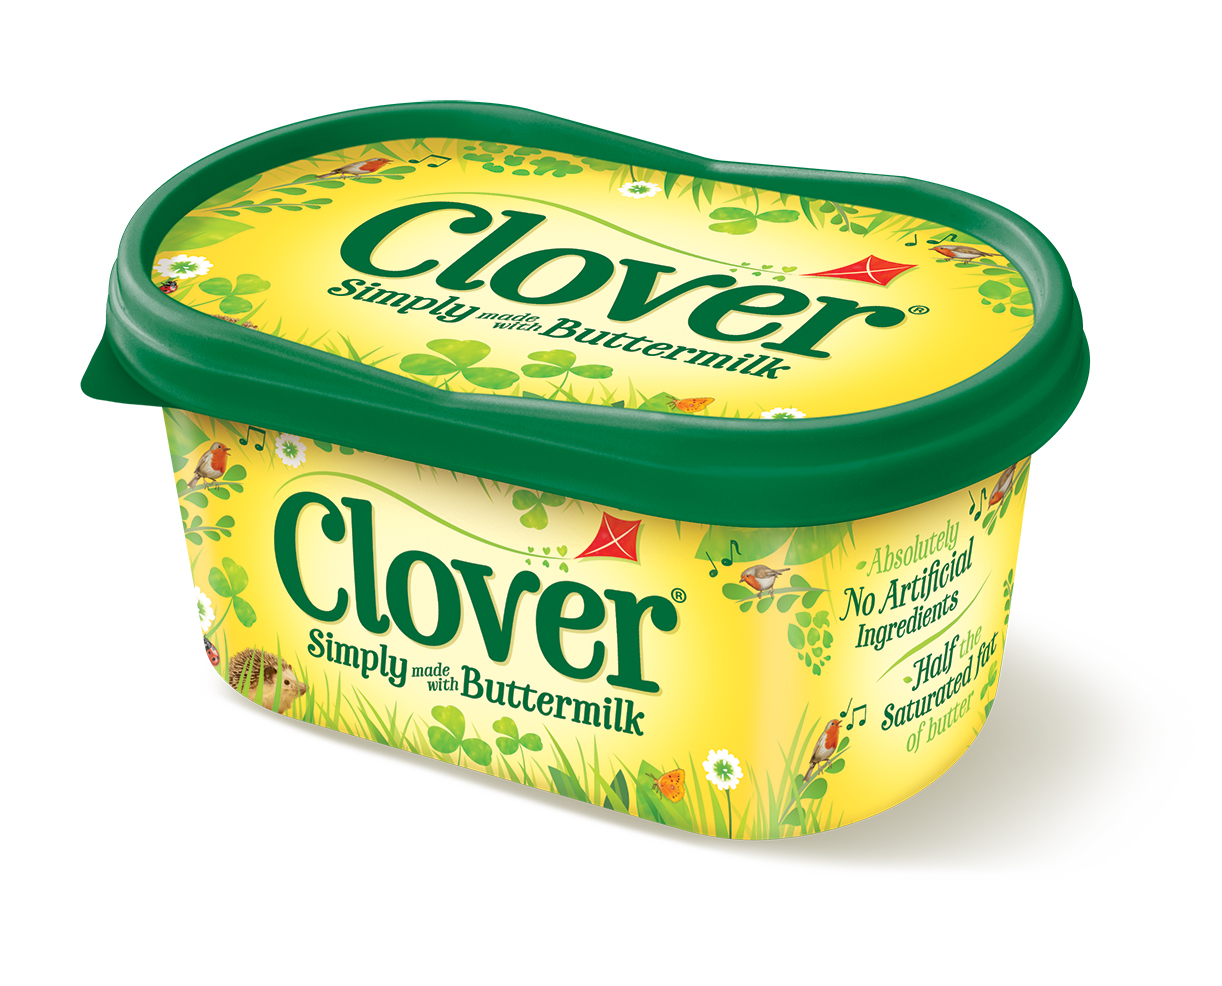 New Look For Clover